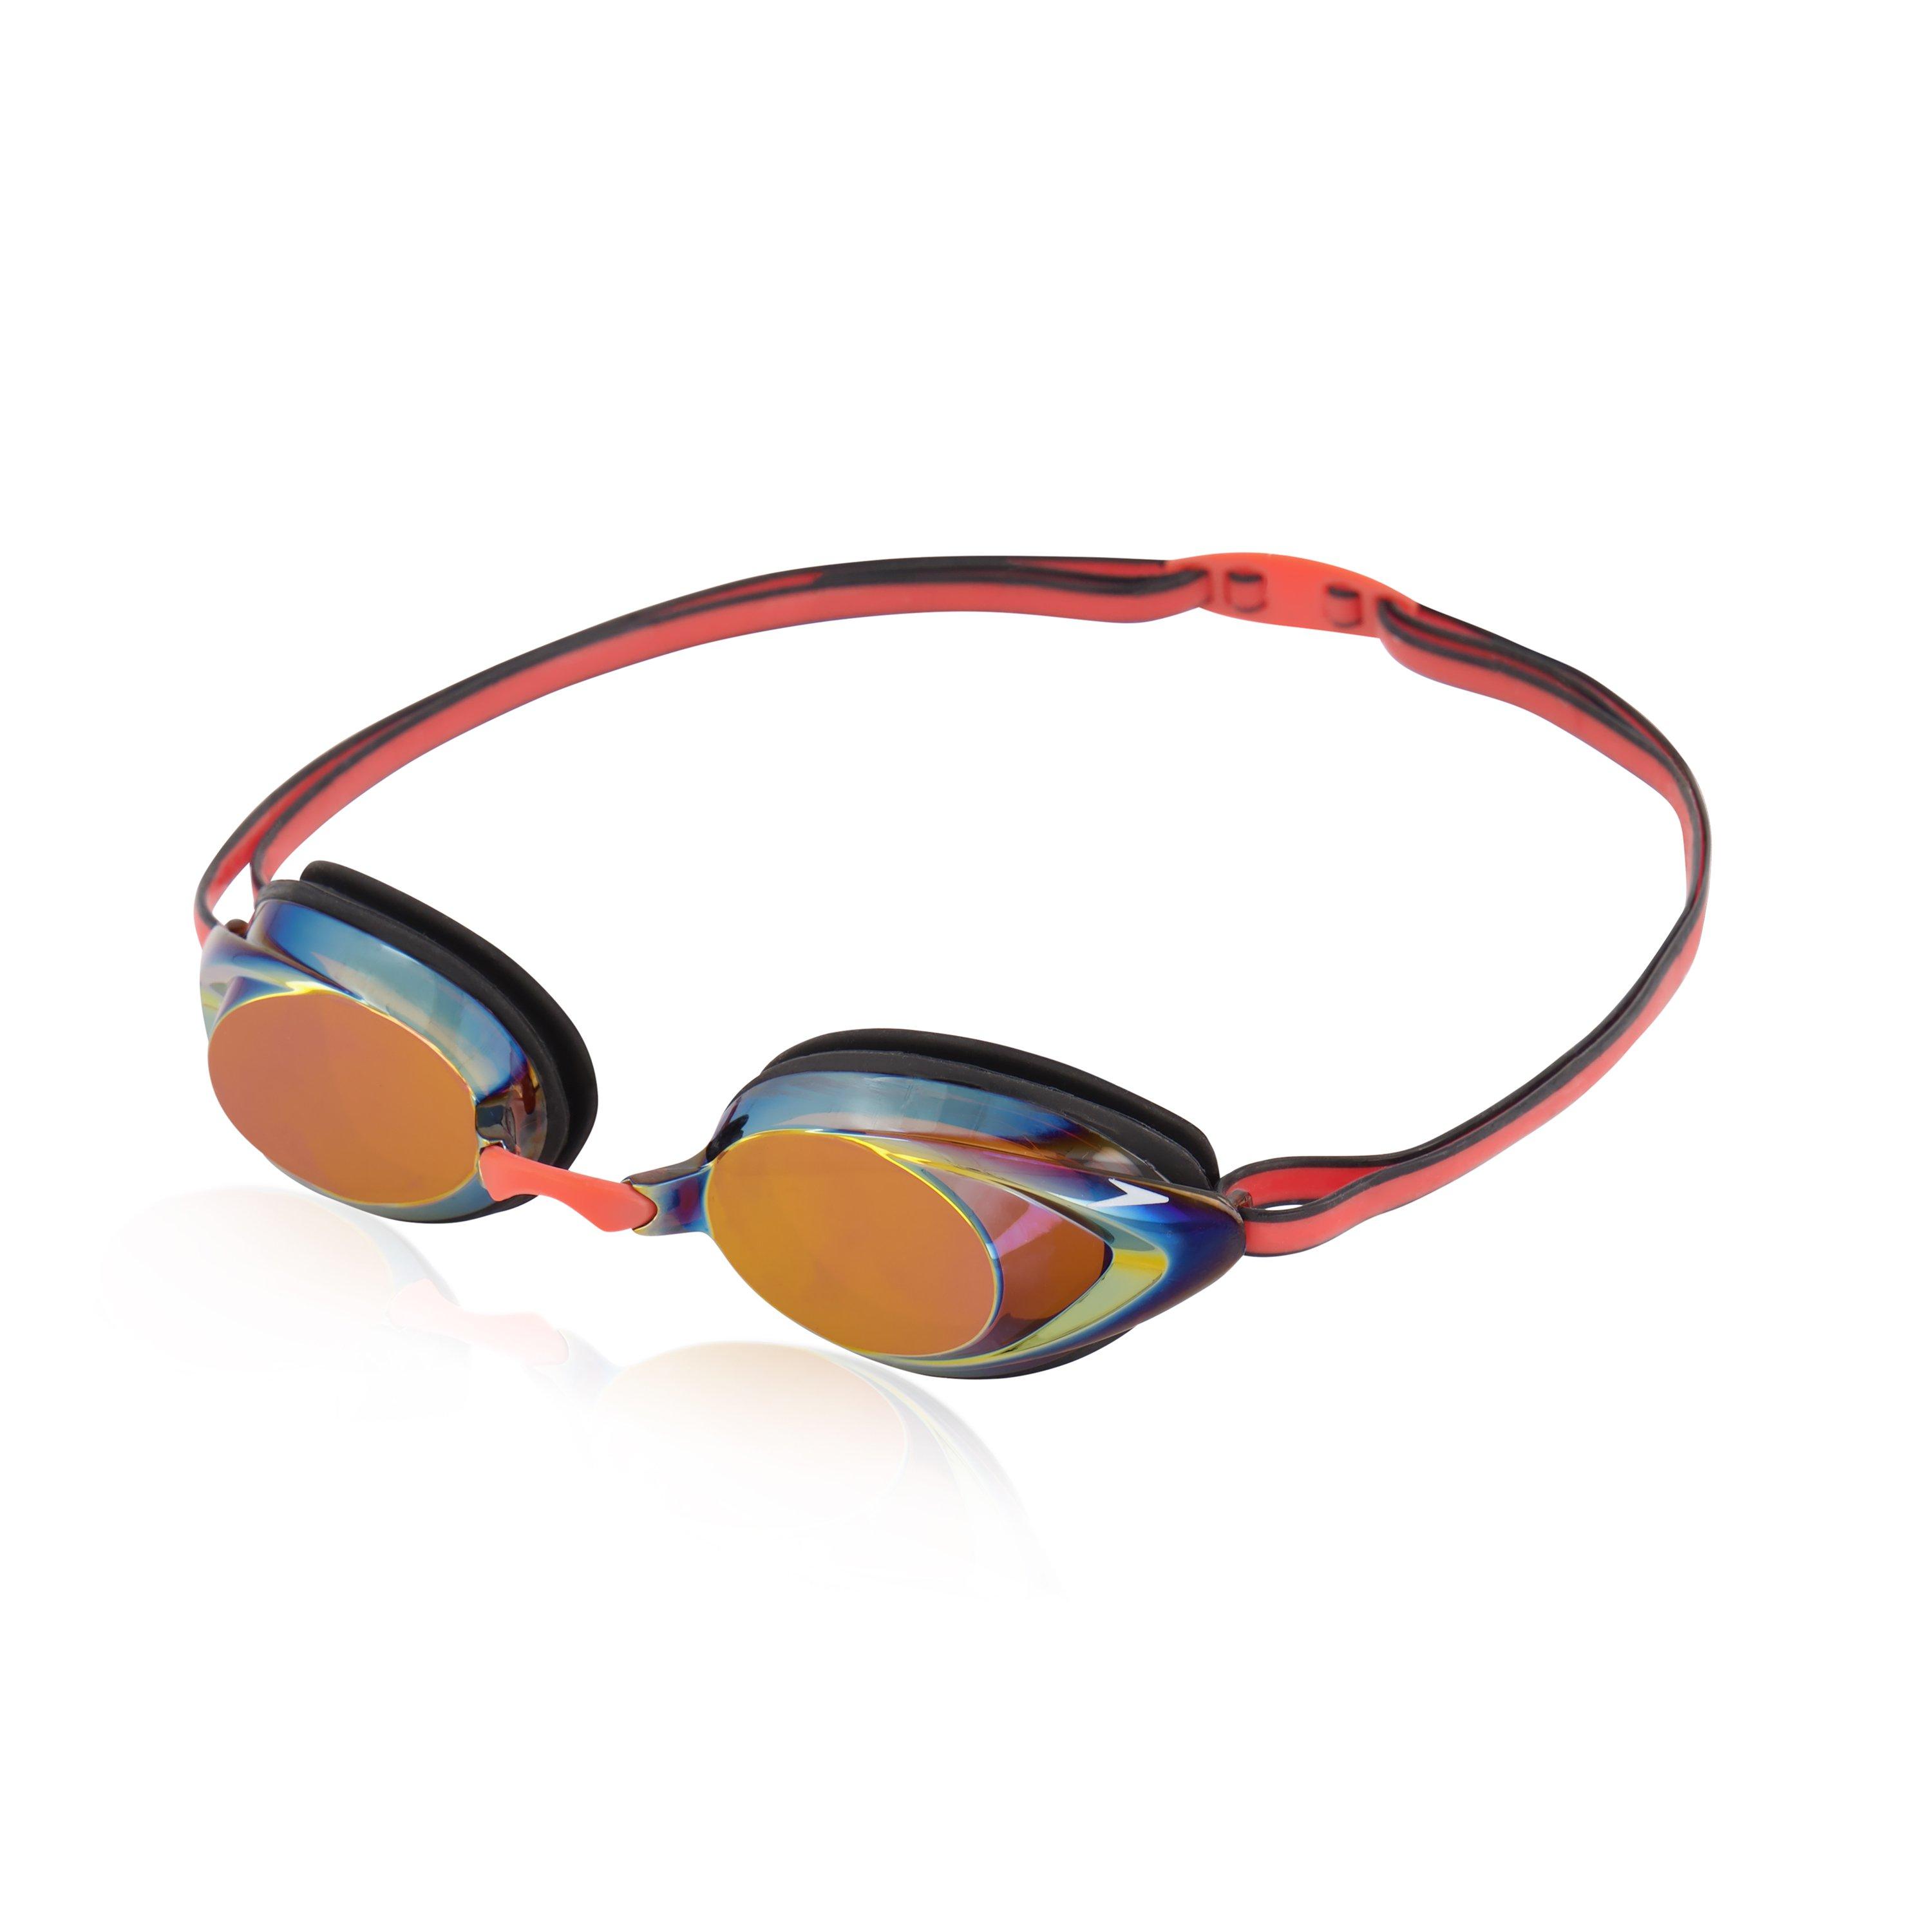 Speedo Vanquisher 2.0 Goggles in Lazy Daisy color